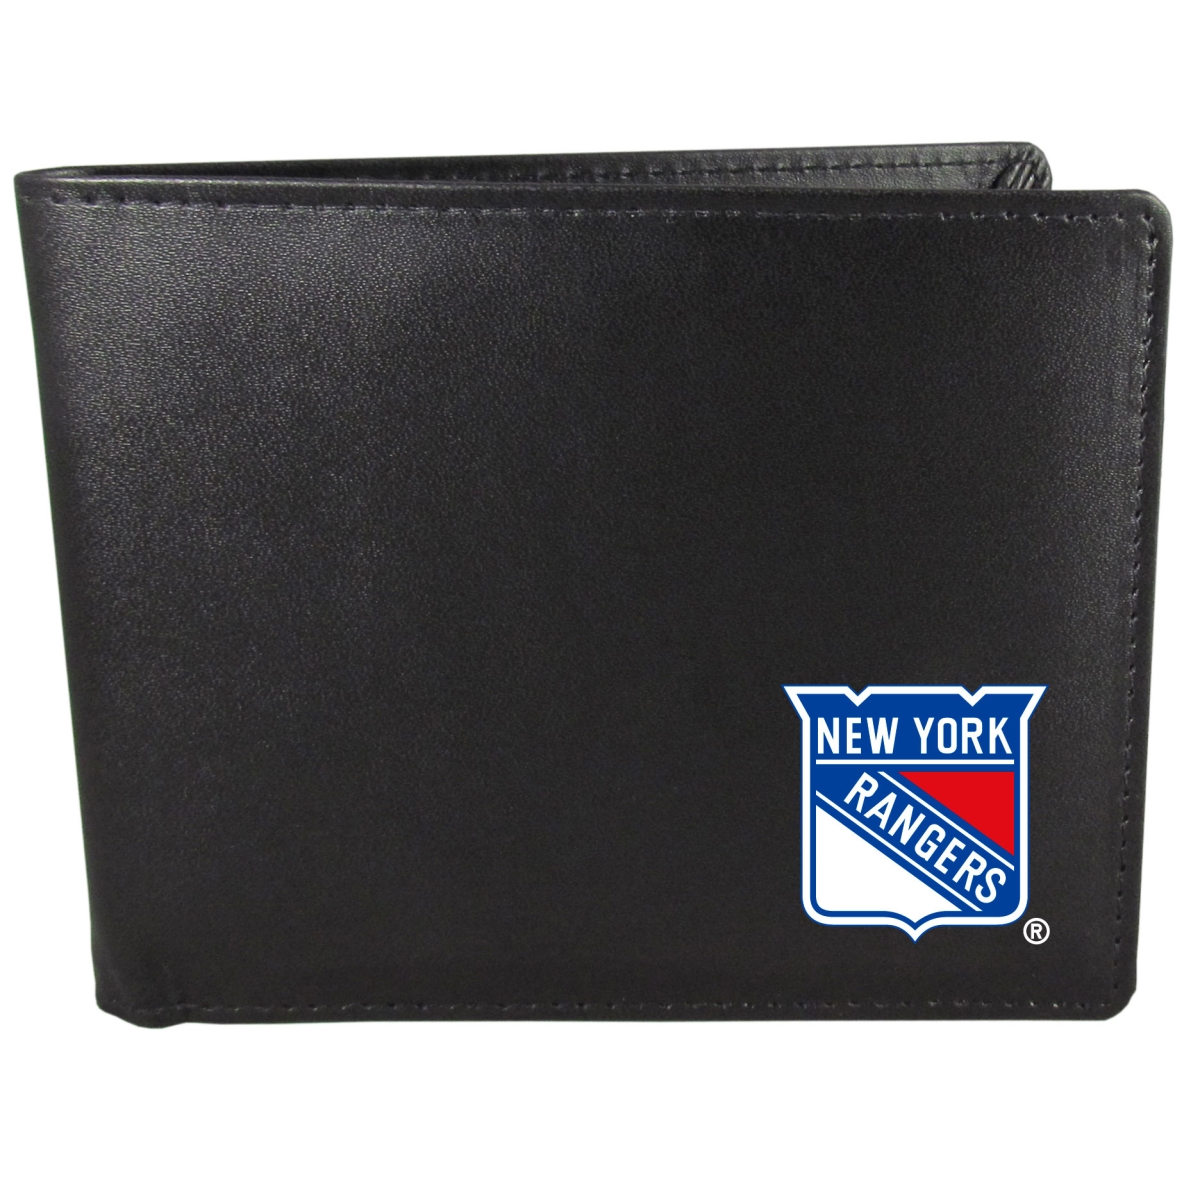 Picture of Siskiyou HBWP105 Male NHL New York Rangers Bi-fold Wallet - One Size